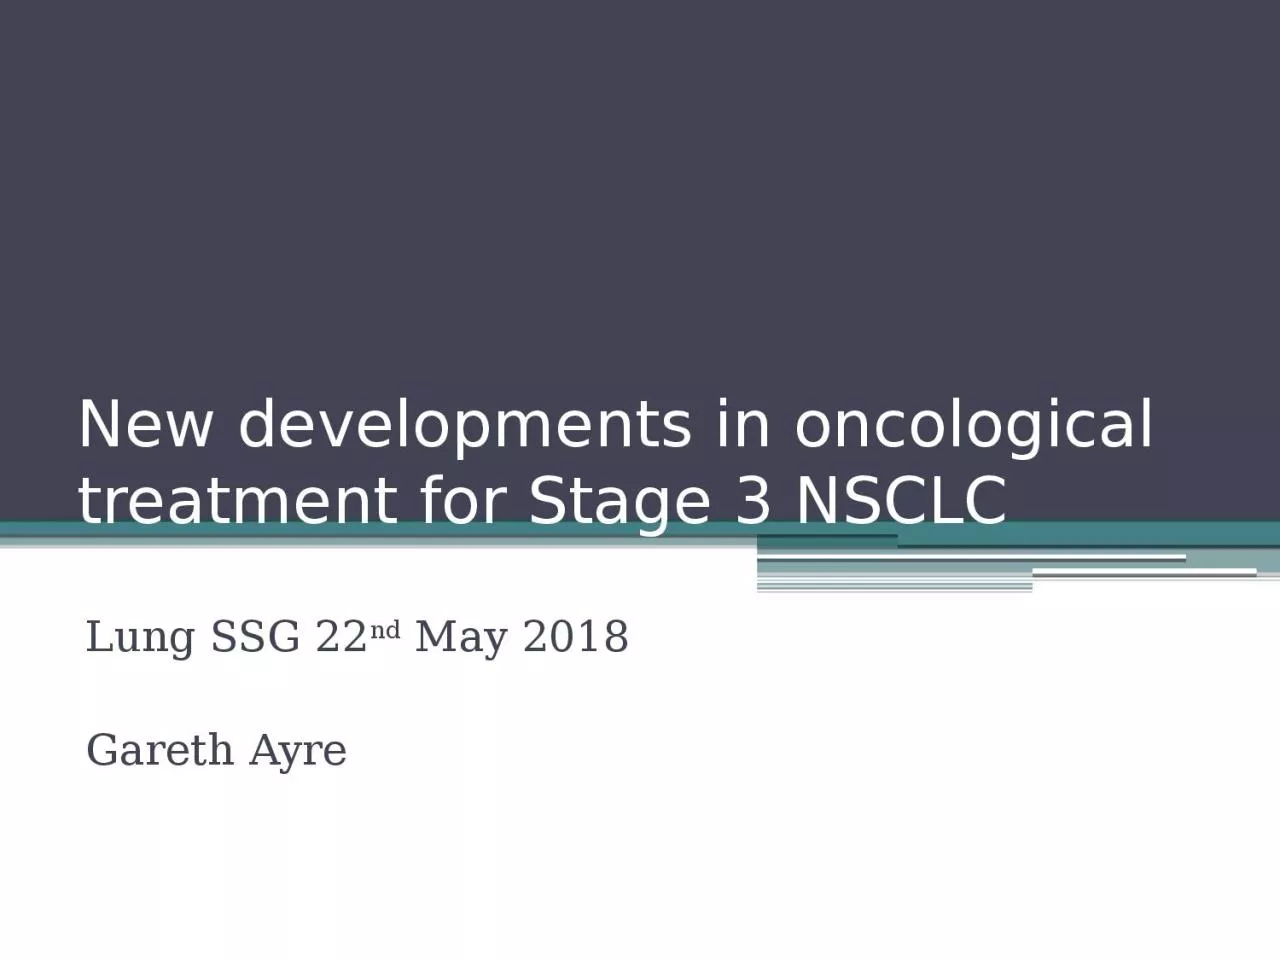 New developments in oncological treatment for Stage 3 NSCLC